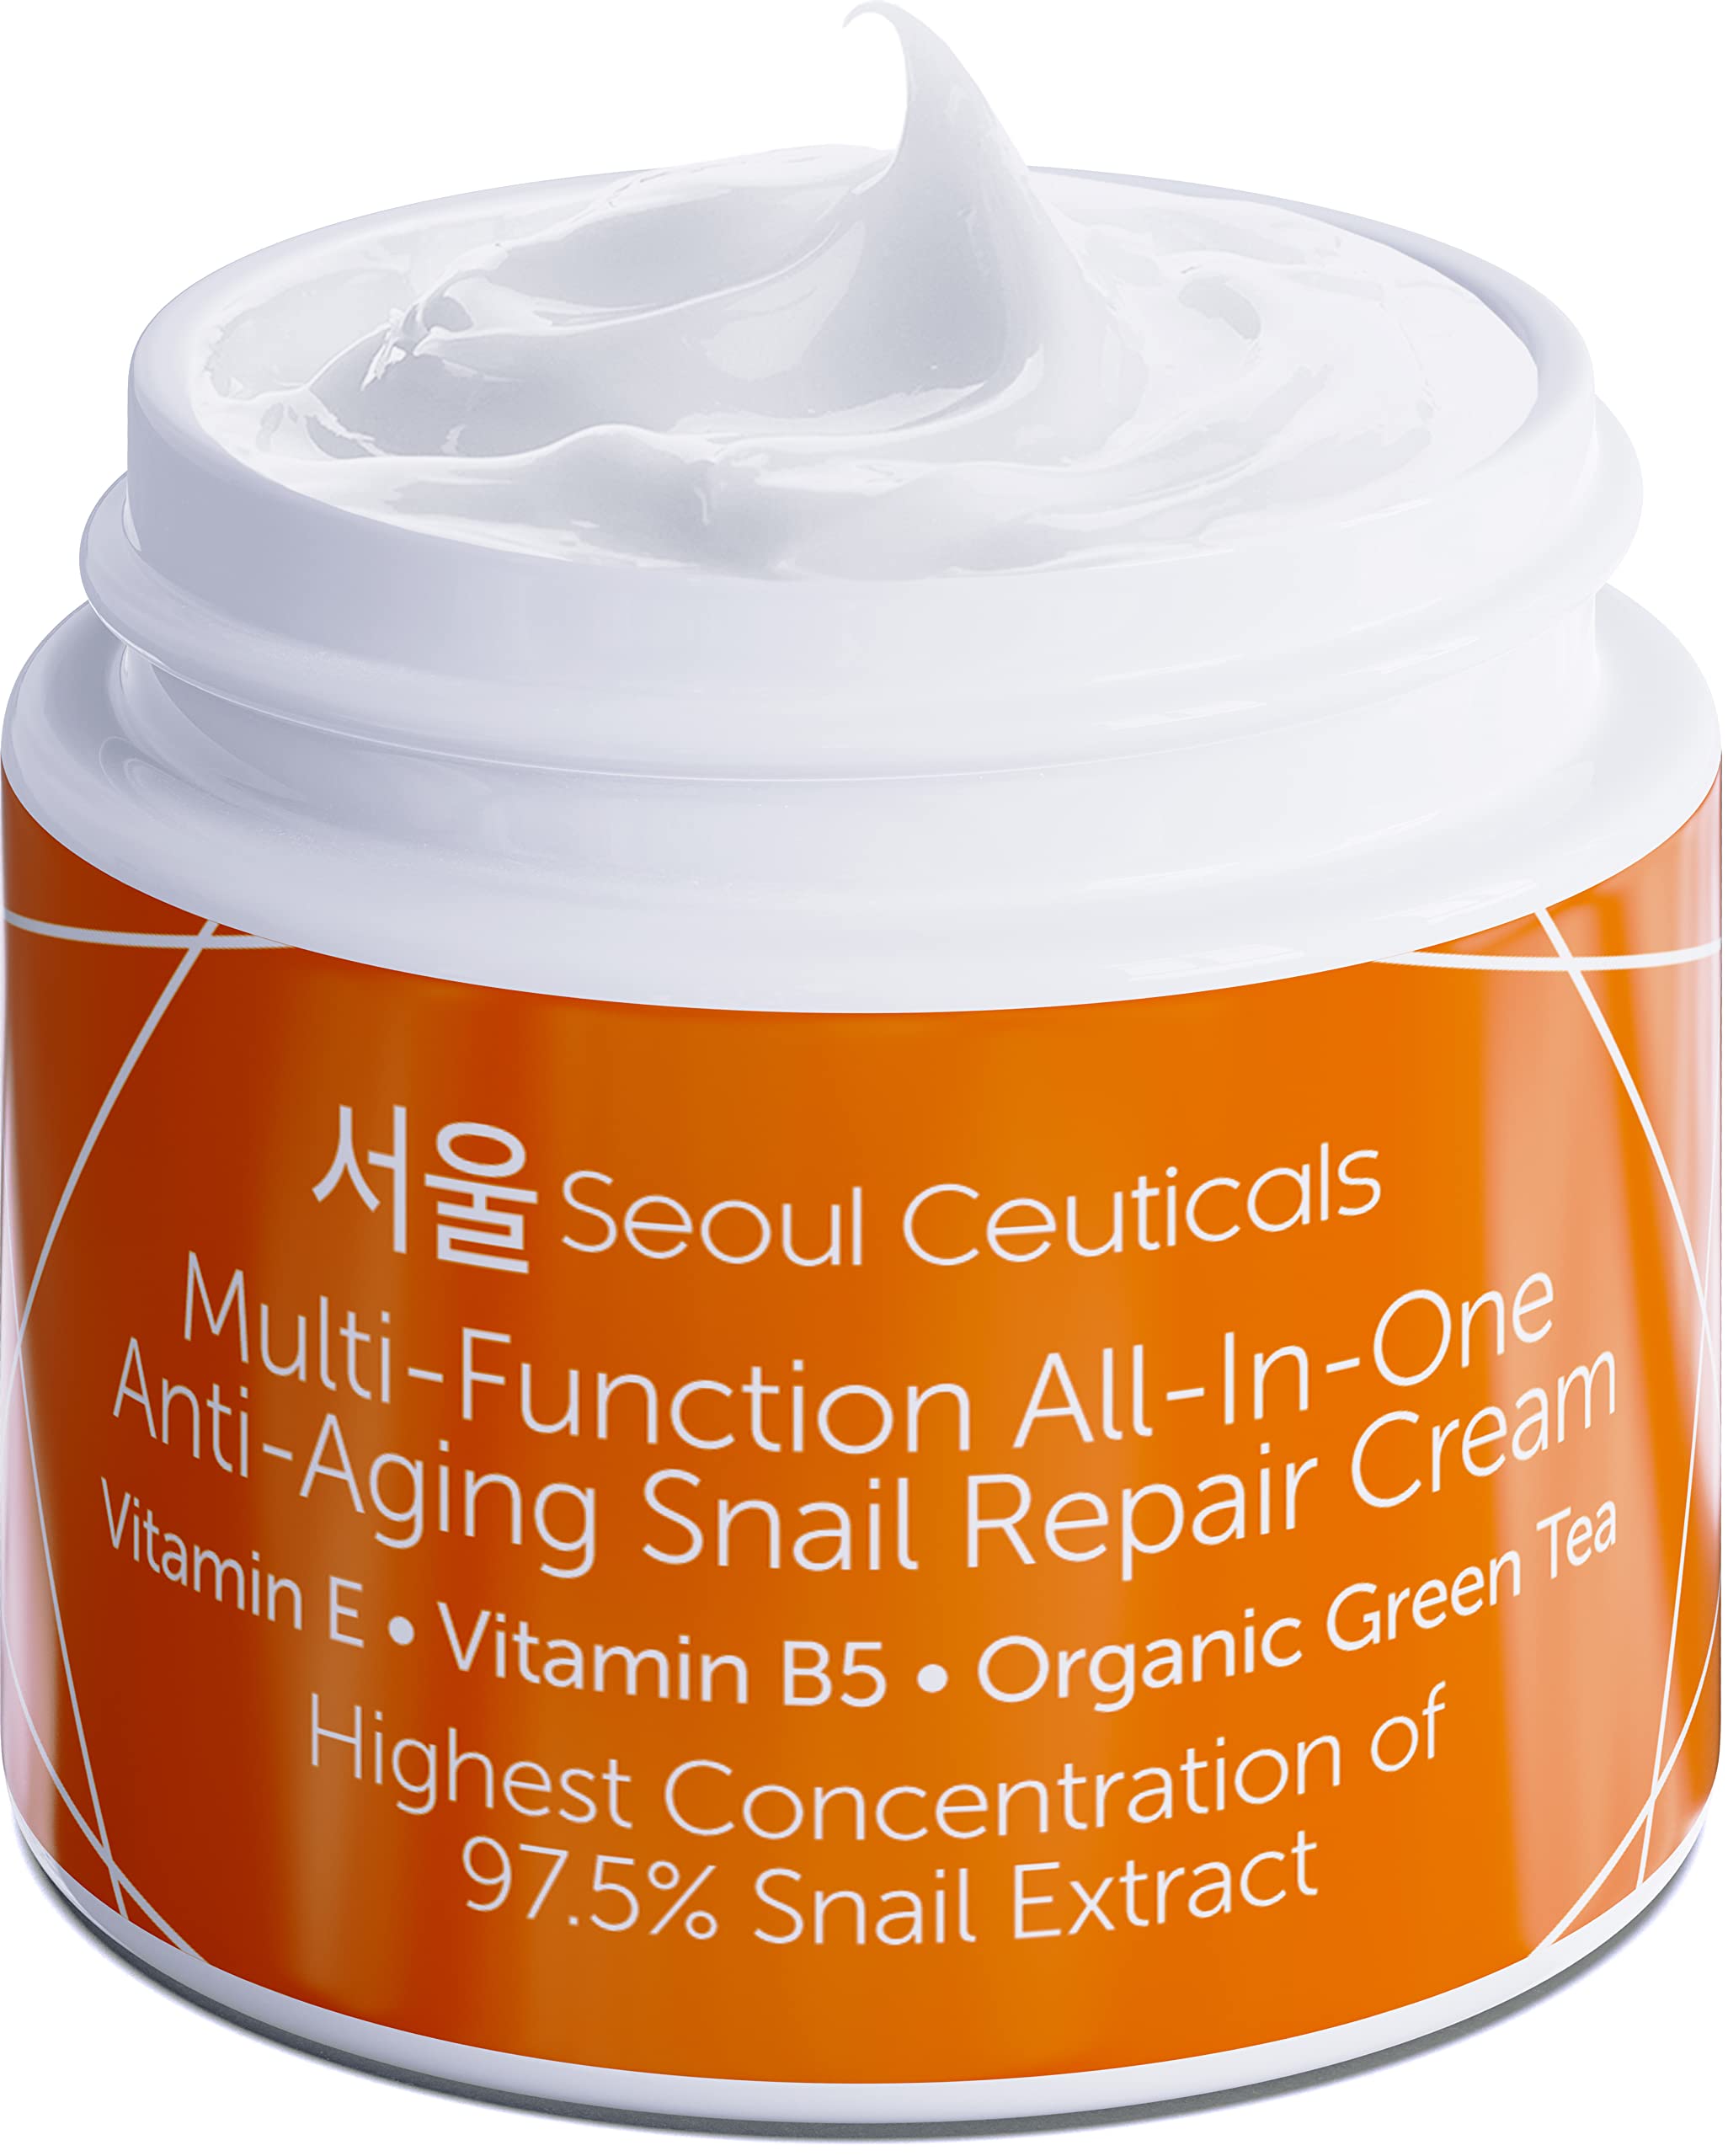 Korean Skin Care Set - Potent Vitamin C Serum with Korean Snail Repair Cream - The Most Potent Duo For Providing You With That Bright, Youthful Glow. Your Natural & Organic Korean Beauty Routine